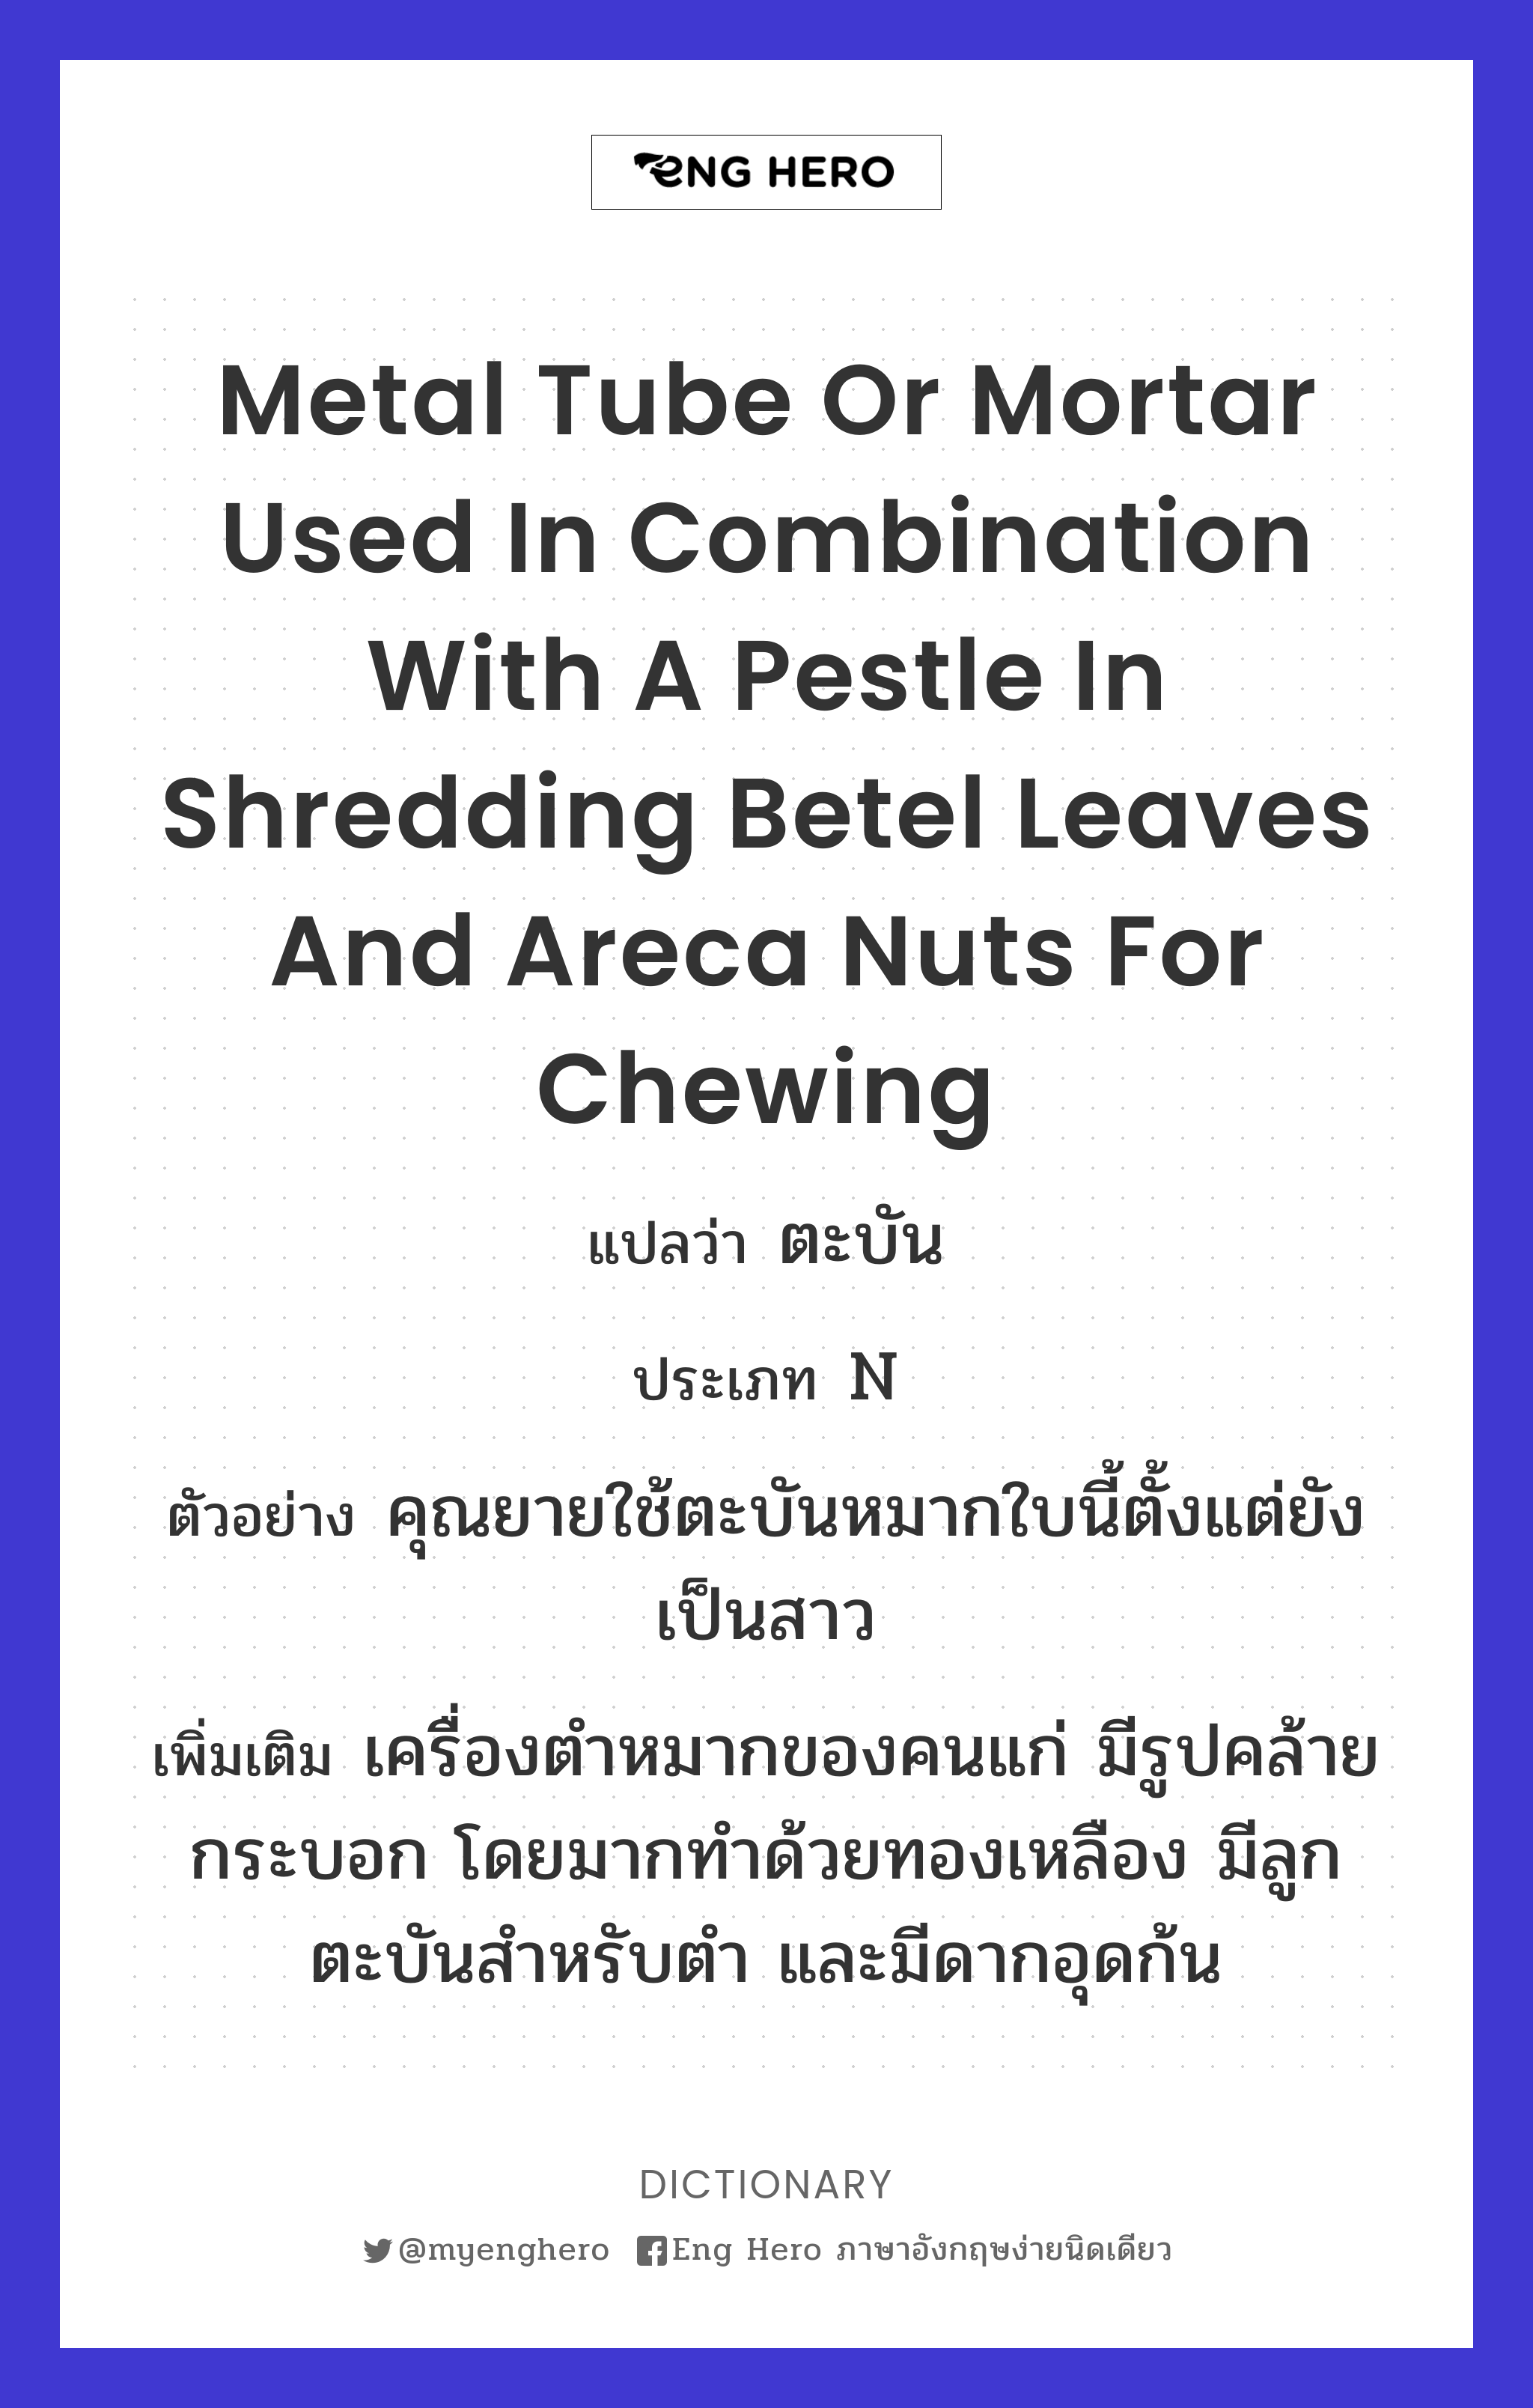 metal tube or mortar used in combination with a pestle in shredding betel leaves and areca nuts for chewing